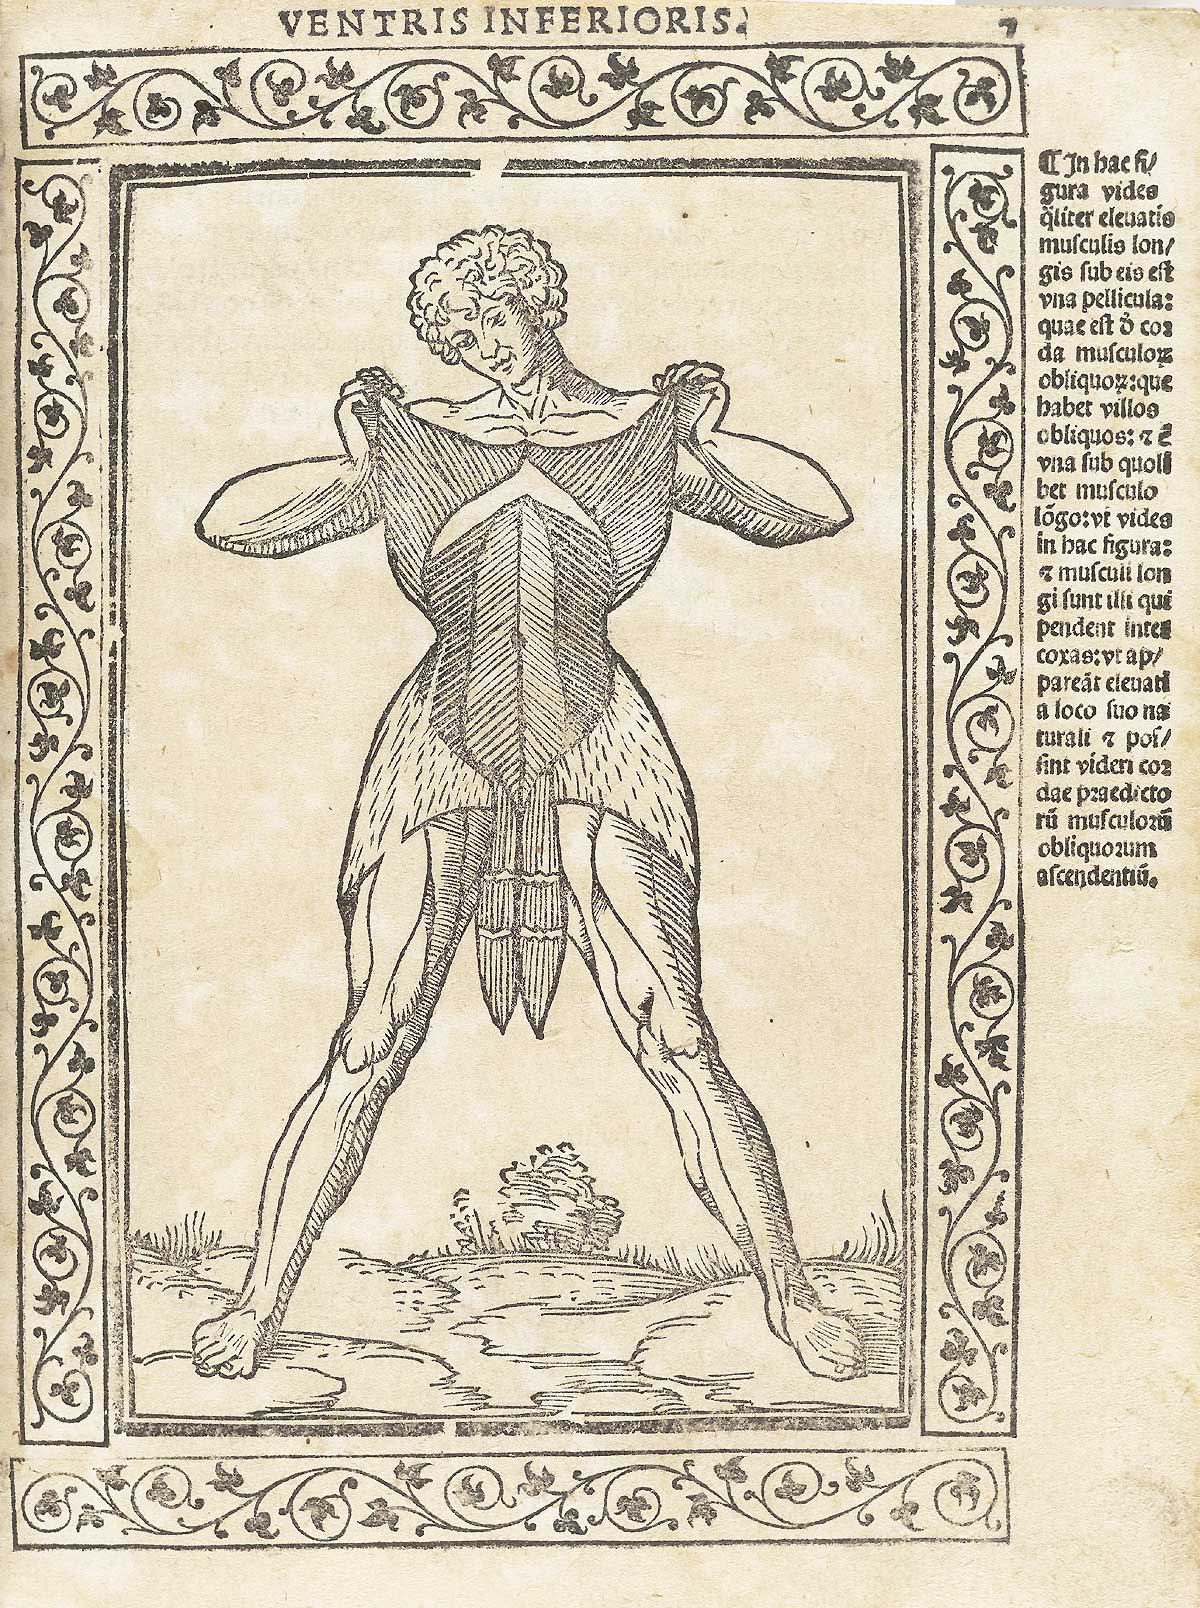 Woodcut of male anatomical figure raising the skin to give a view of his abdominal muscles, with a woodcut border and text in Latin on the right side of page.